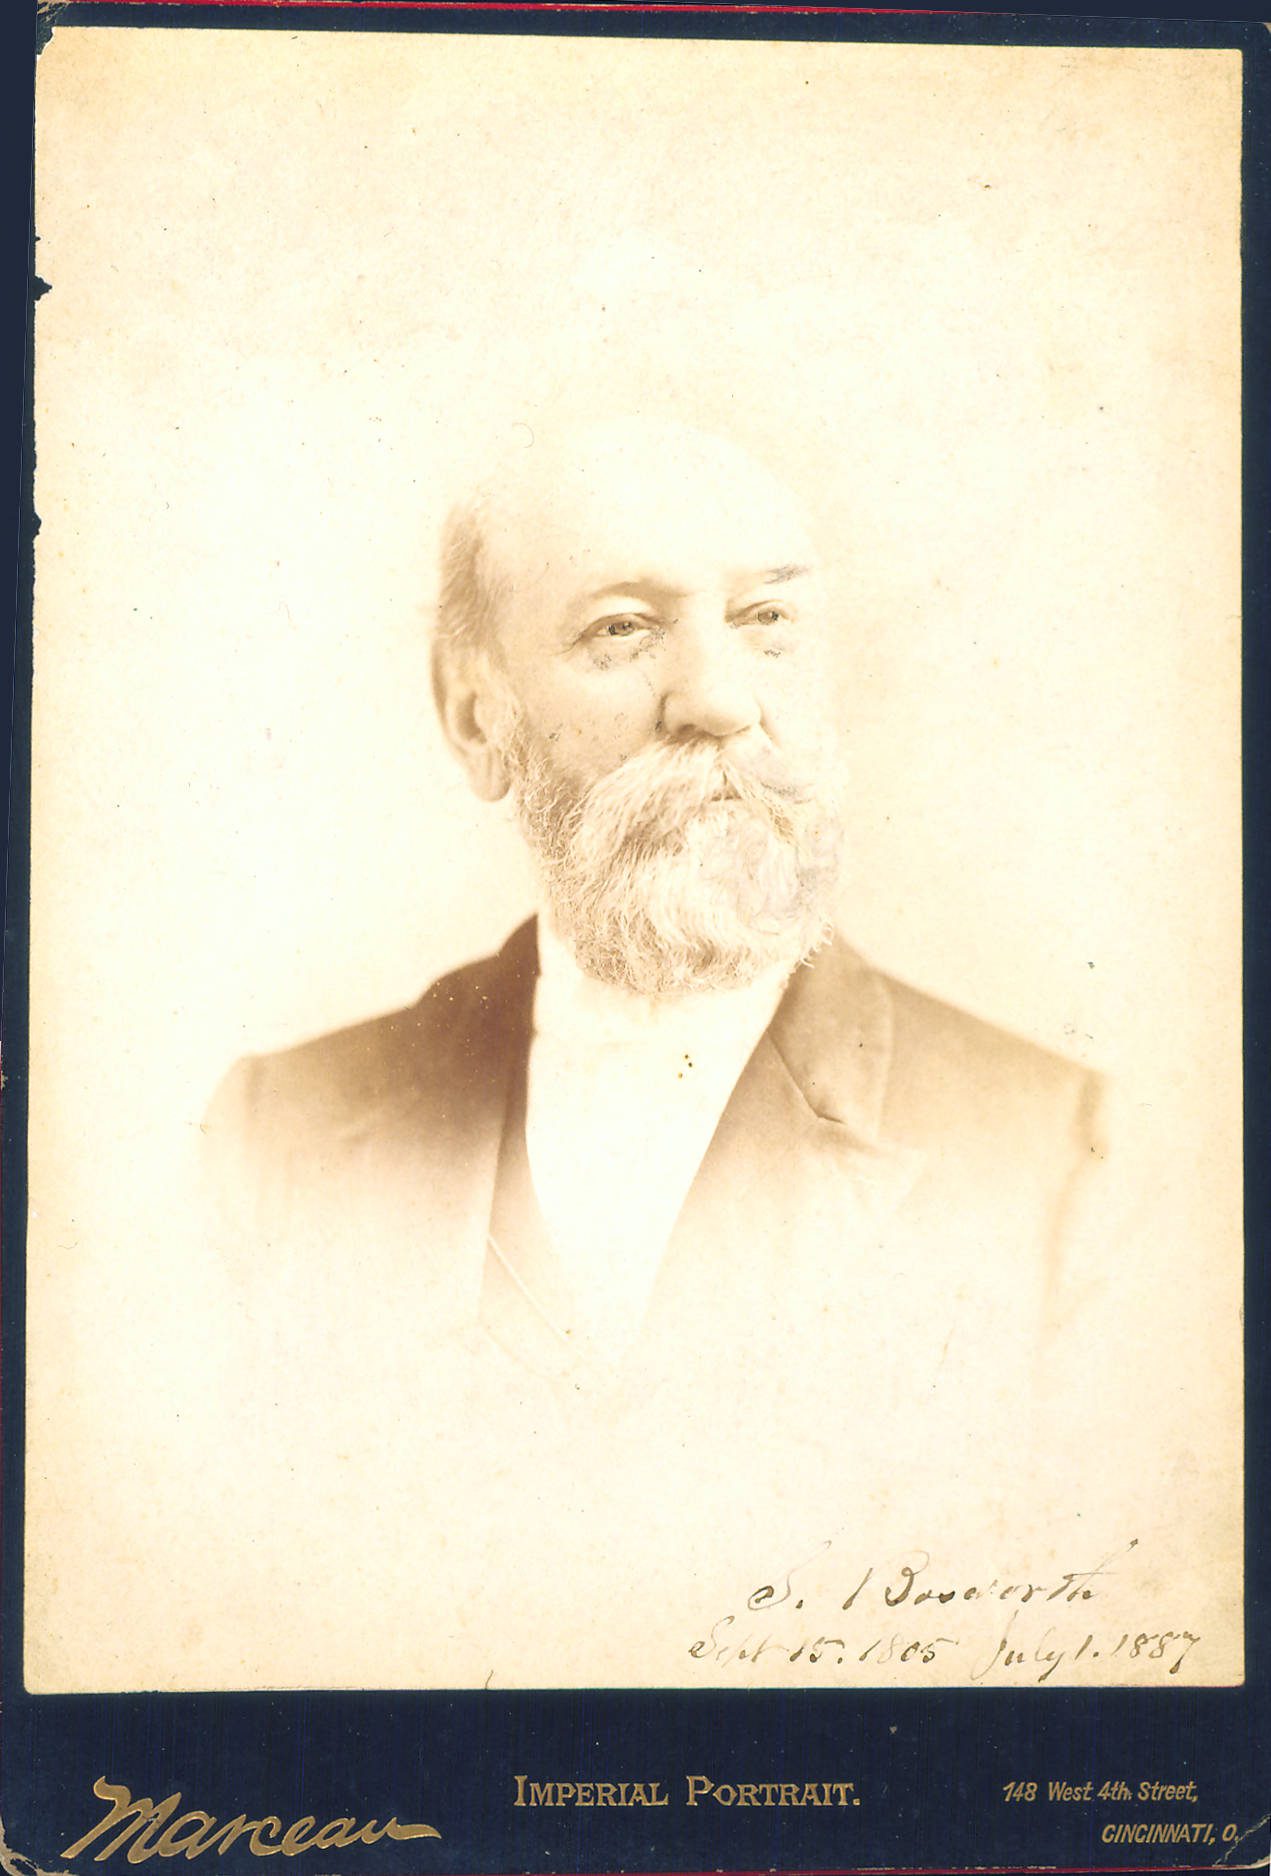 Sepia tone photographic portrait of a white man with a beard wearing a dark suit jacket and white shirt